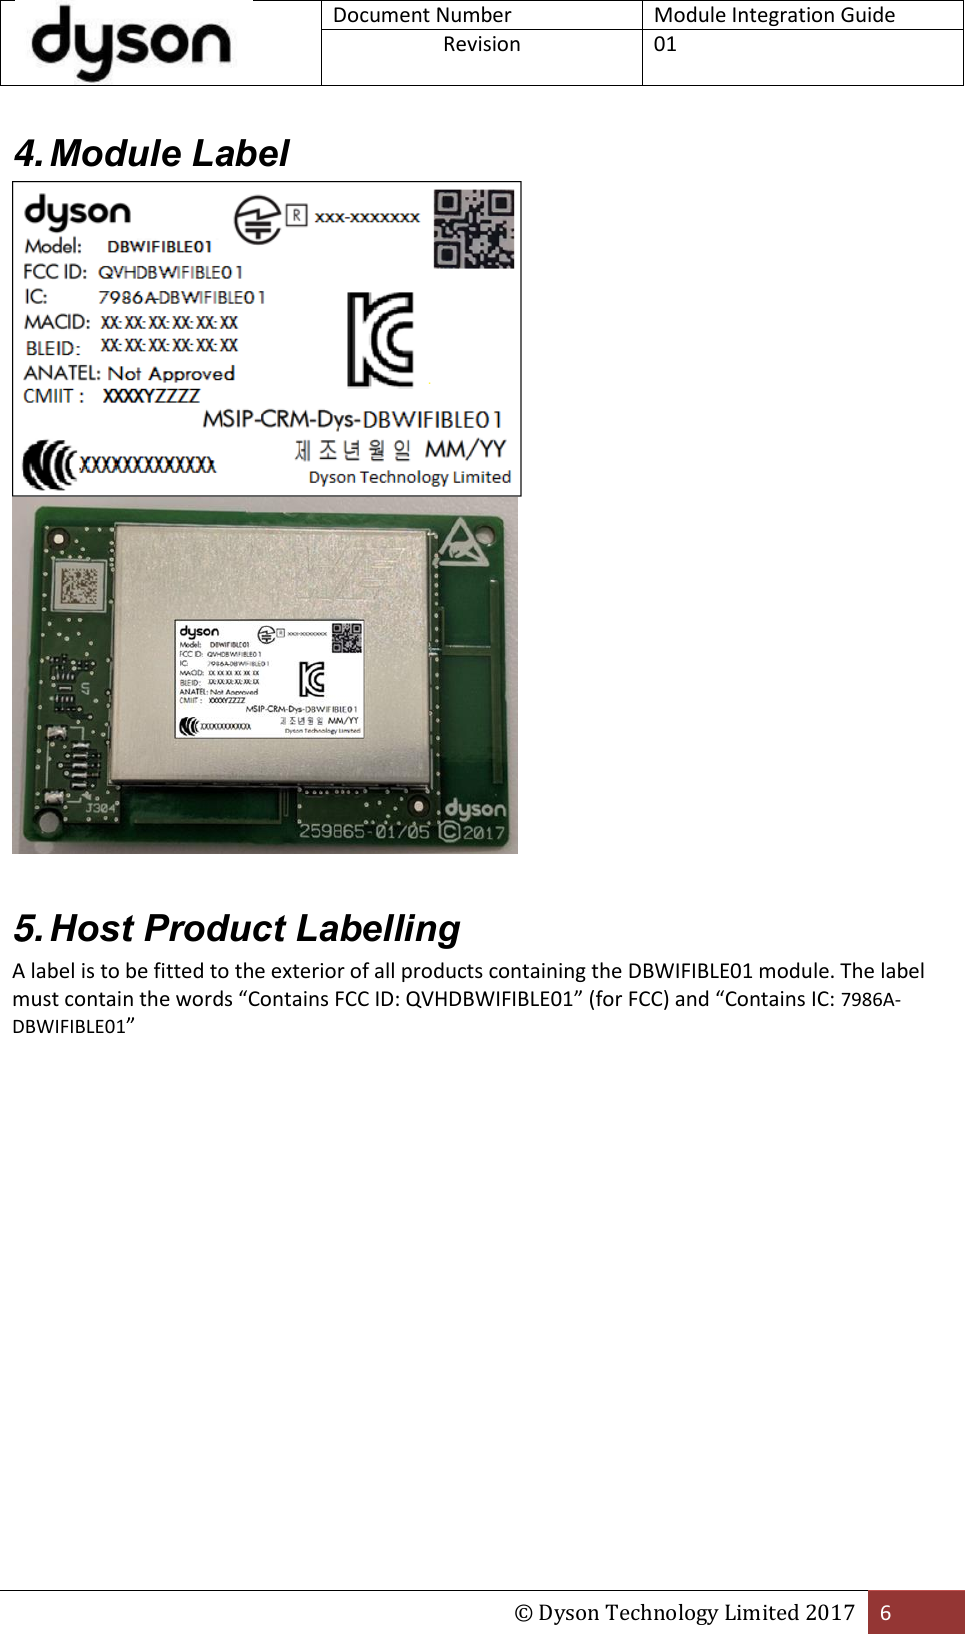  Document Number Module Integration Guide Revision  01  © Dyson Technology Limited 2017 6  4. Module Label    5. Host Product Labelling A label is to be fitted to the exterior of all products containing the DBWIFIBLE01 module. The label must contain the words “Contains FCC ID: QVHDBWIFIBLE01” (for FCC) and “Contains IC: 7986A-DBWIFIBLE01”    